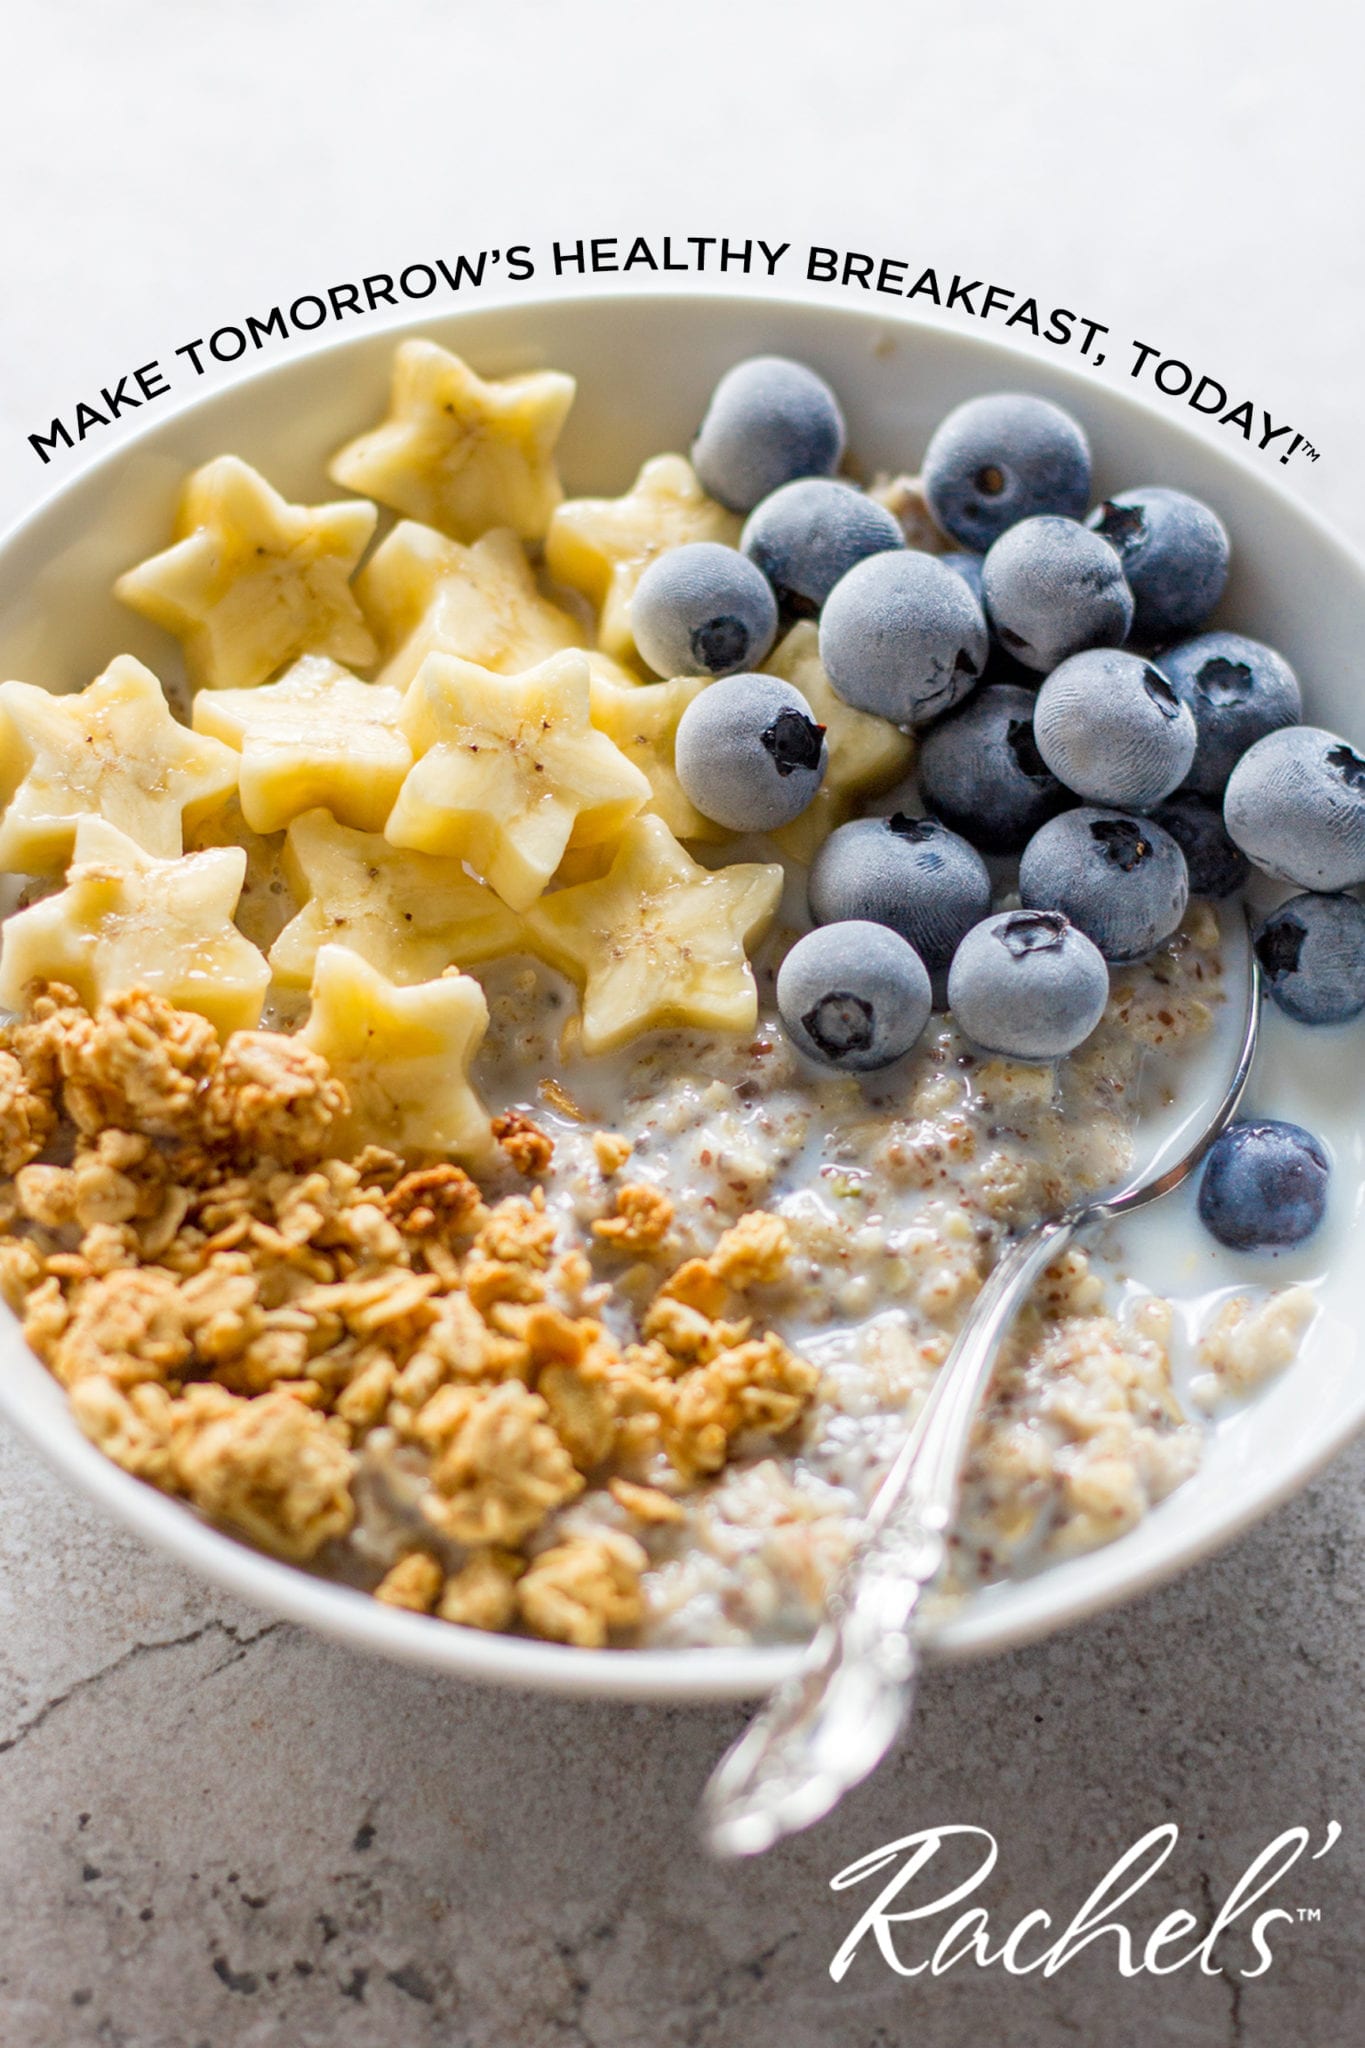 Rachel Overnight oats in bowl with fruit